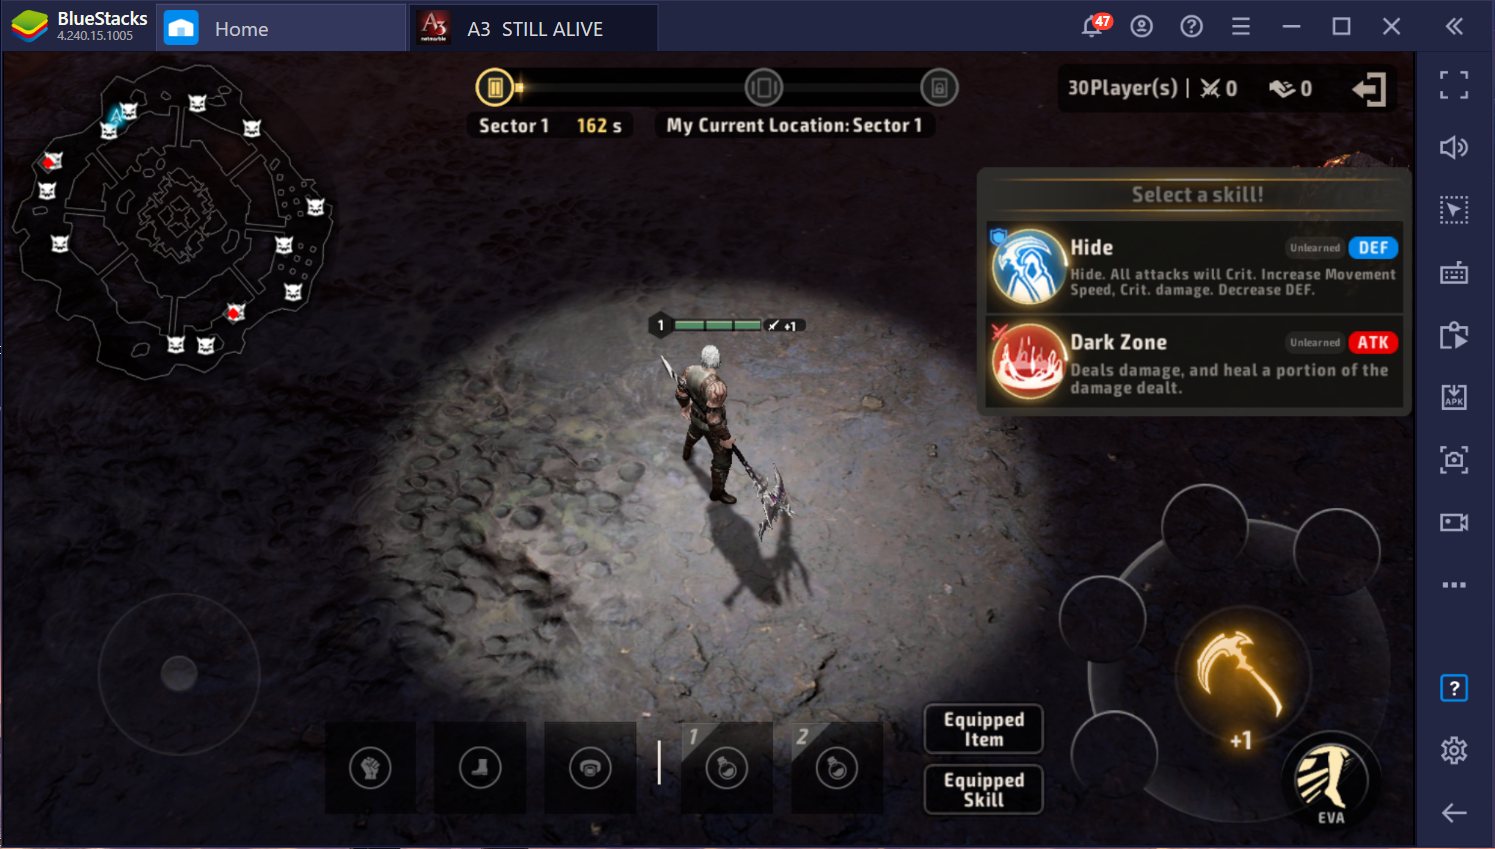 Enjoy the Combination of MMORPG & Battle Royale in A3: STILL ALIVE on PC with BlueStacks